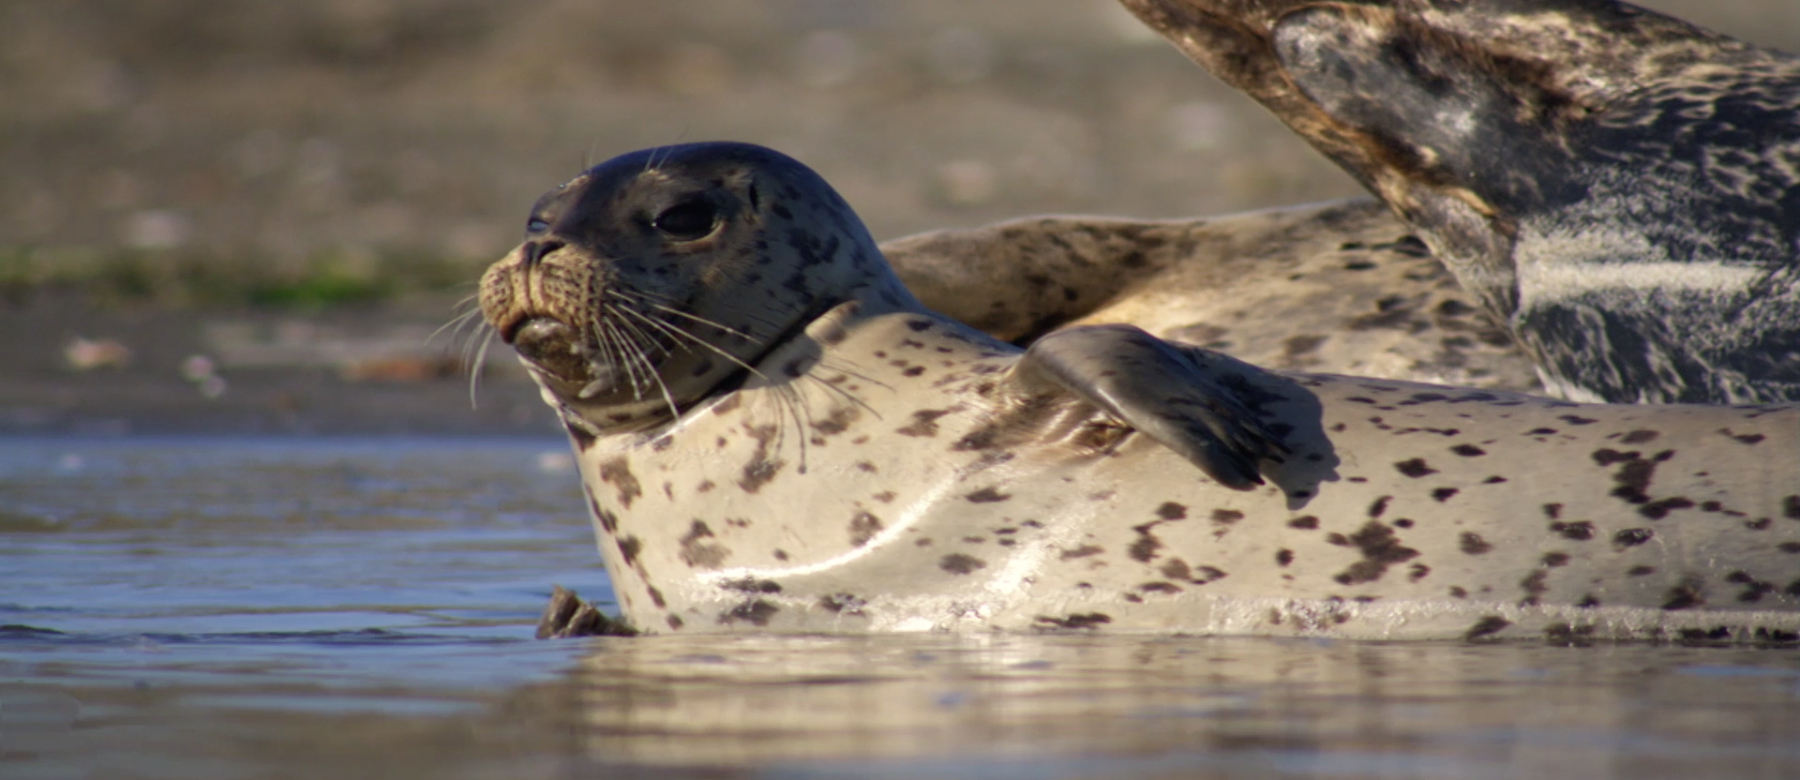 A harbor seal along the shores of the expansion area of Gulf of the Farallones National Marine Sanctuary. (Bob Talbot)